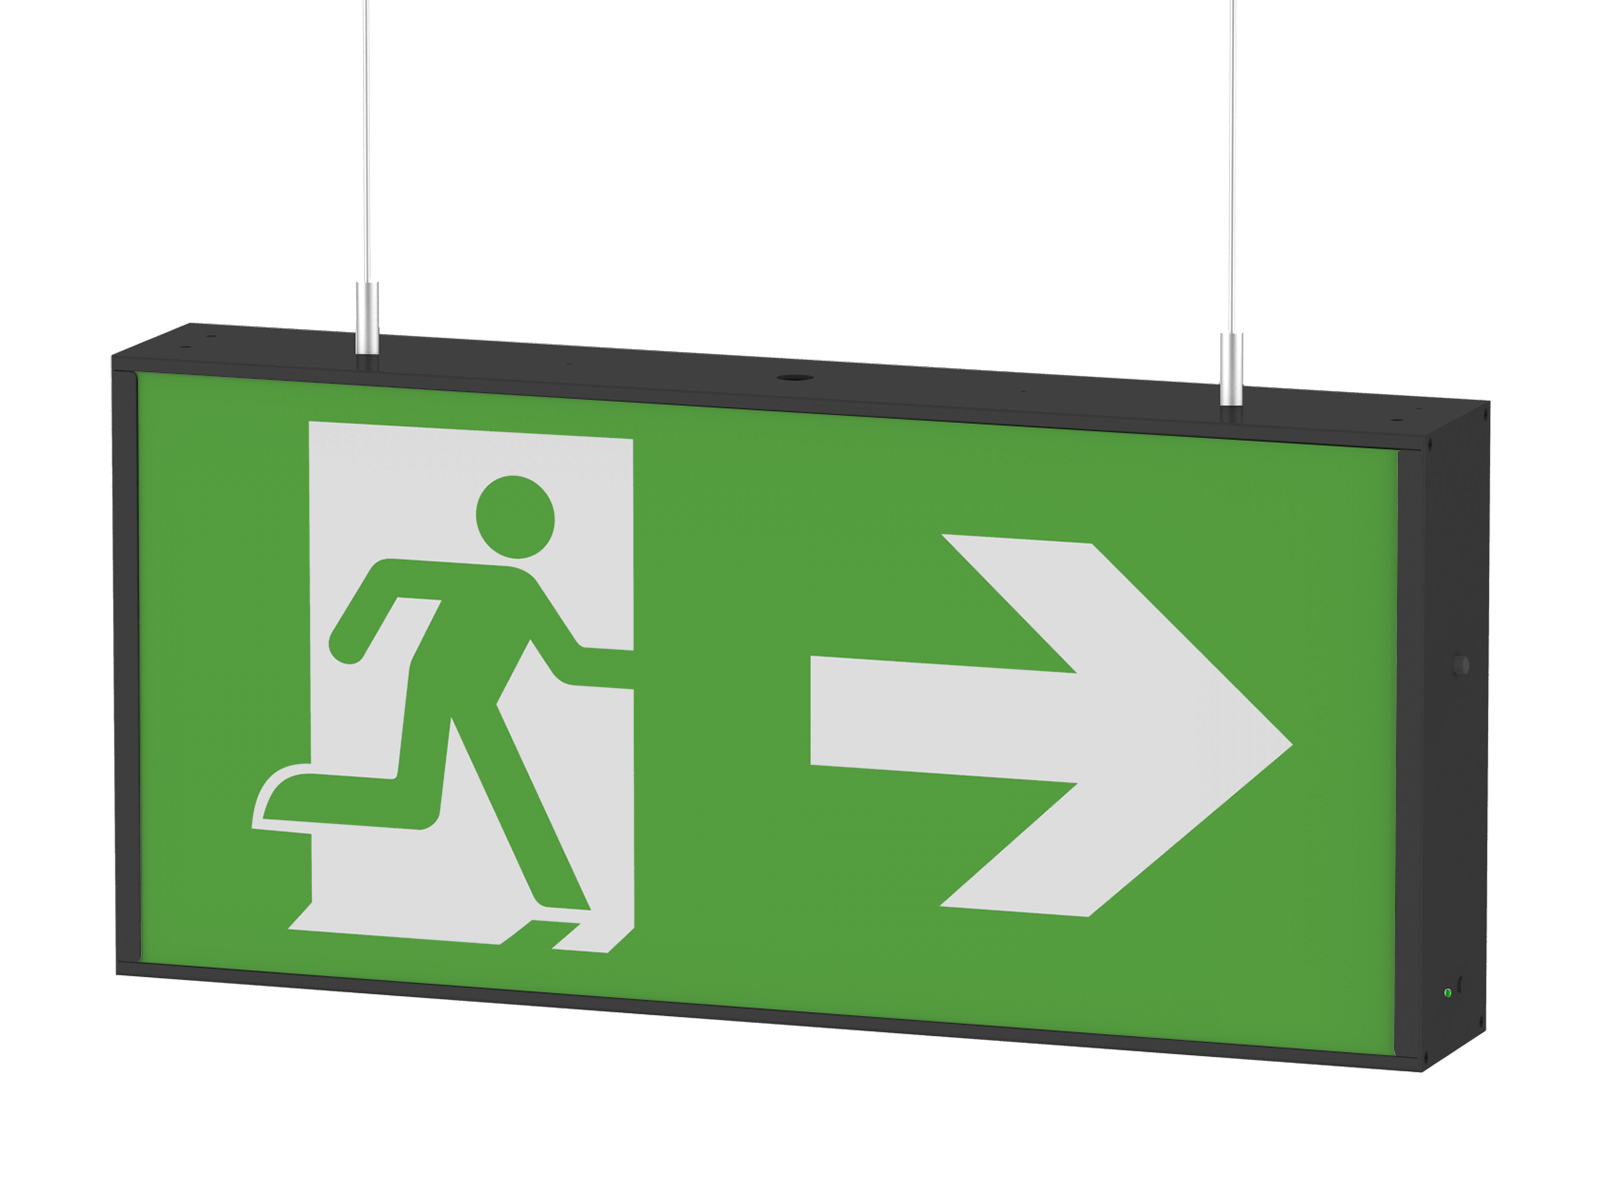 Self contained LED Exit Sign